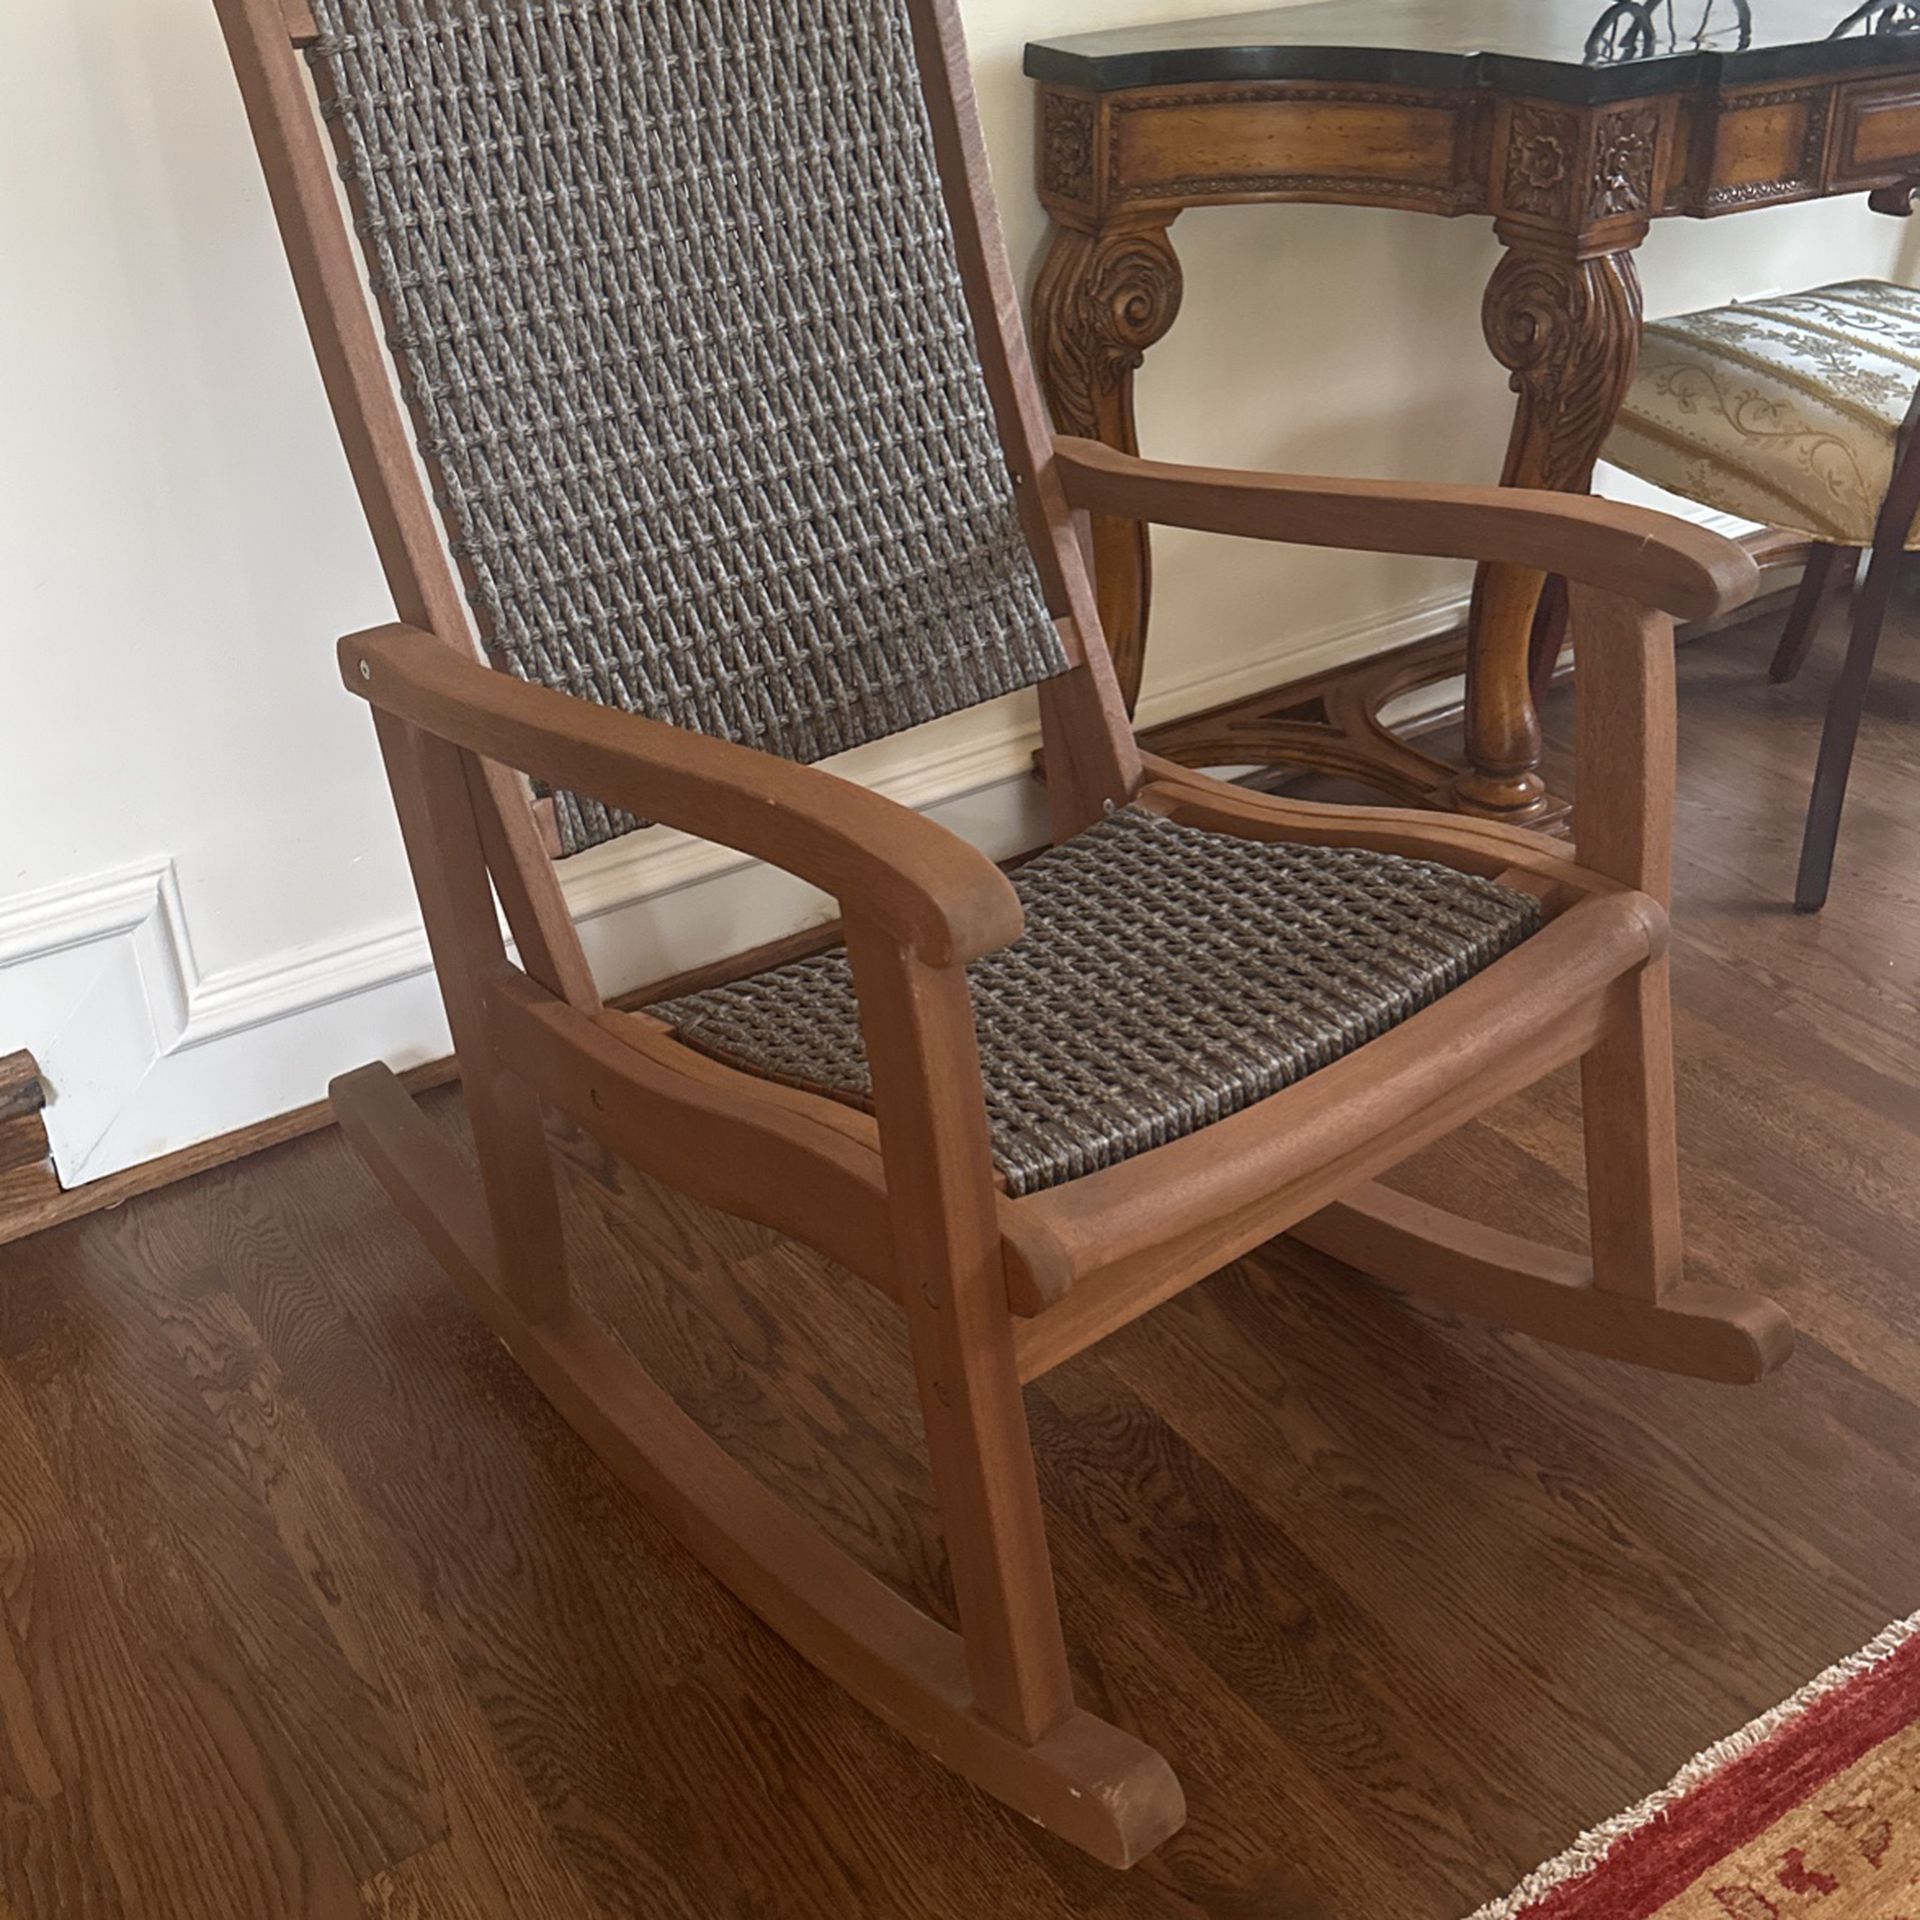 New Rocking Chairs 